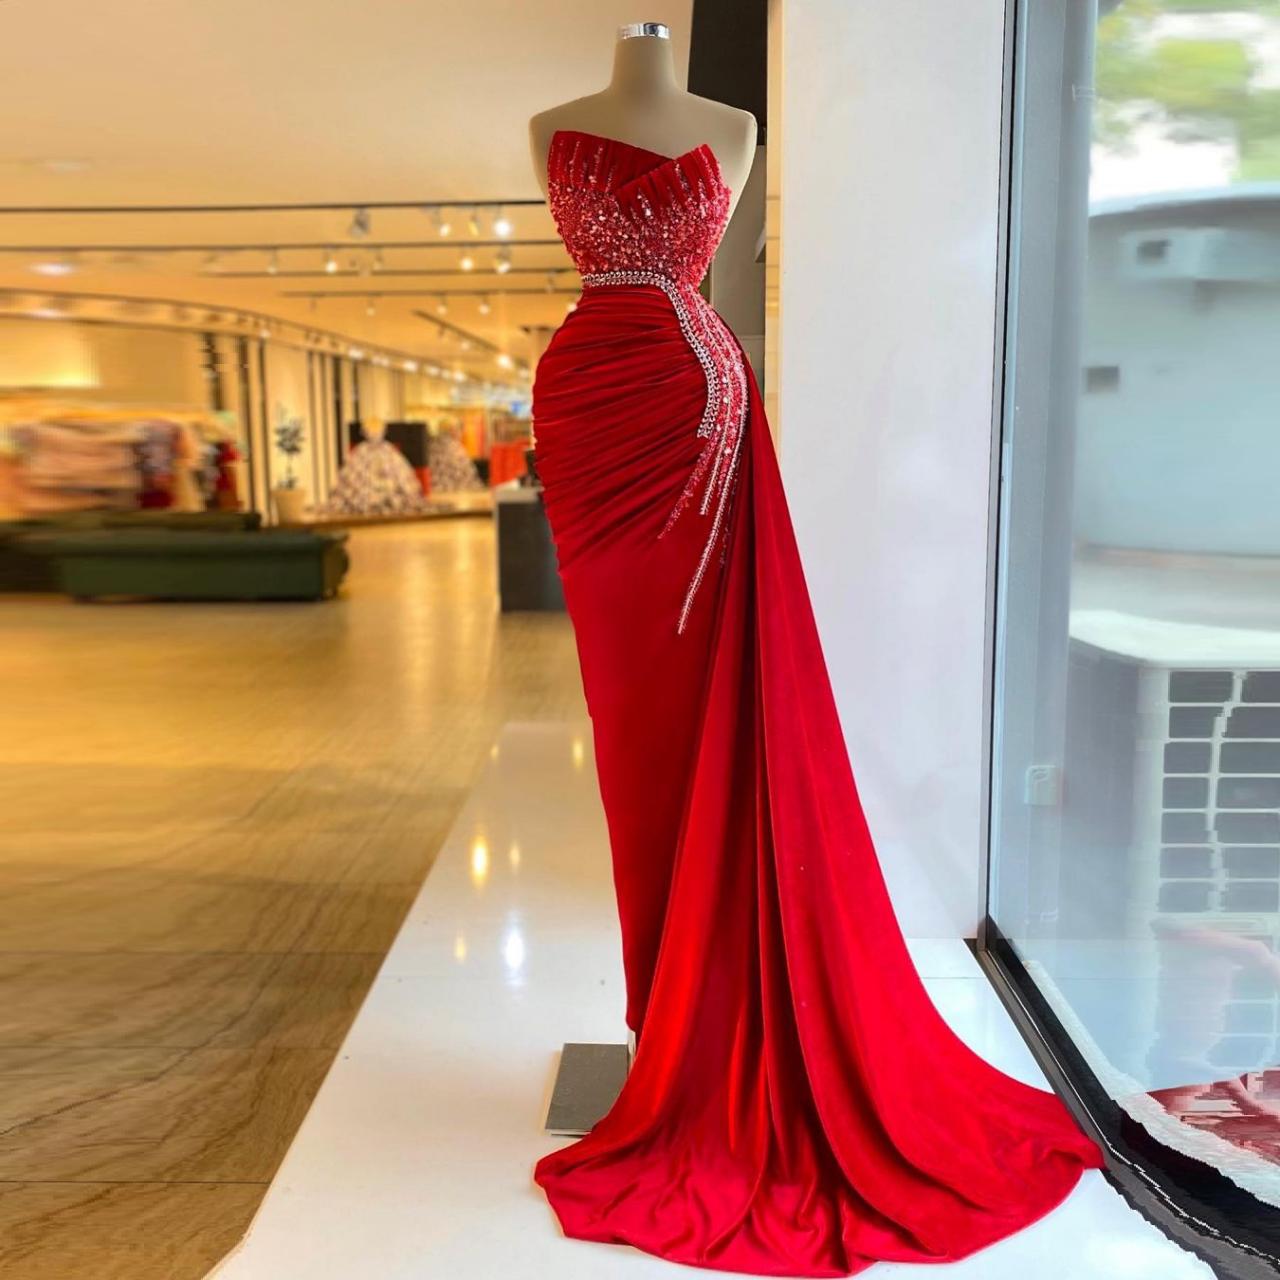 Red Gorgeous Elegant Mermaid Prom Dresses Sleeveless High Waist Women Long Formal Evening Pageant Gowns Custom Made Plus Size